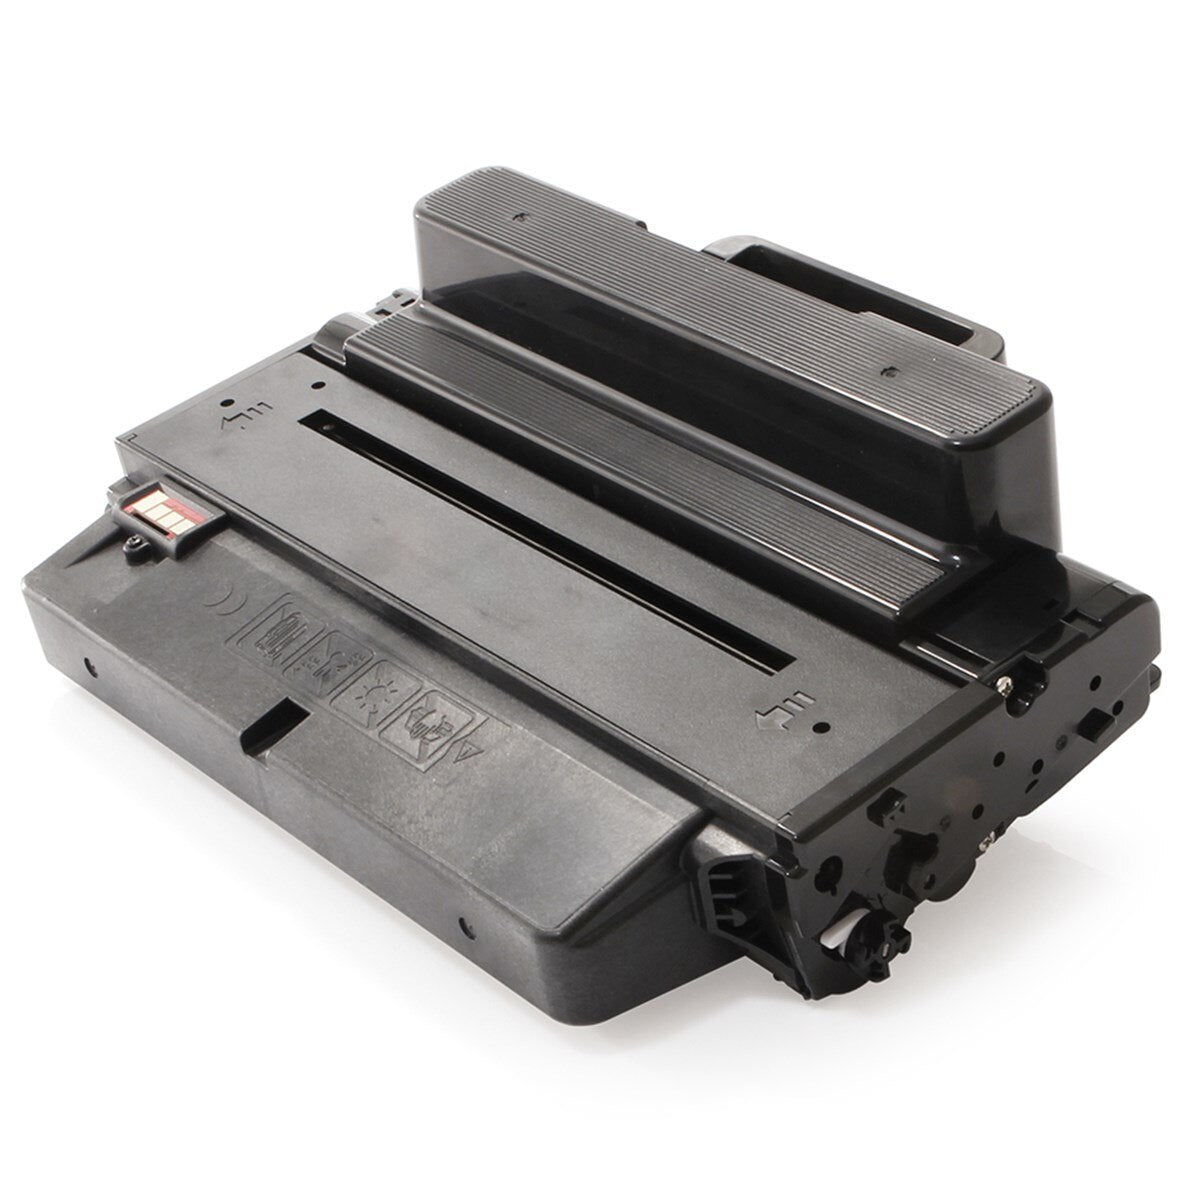 Renewable Replacement For Xerox WorkCentre 3325 (106R02313) Black, Toner Cartridge, 11K High Yield